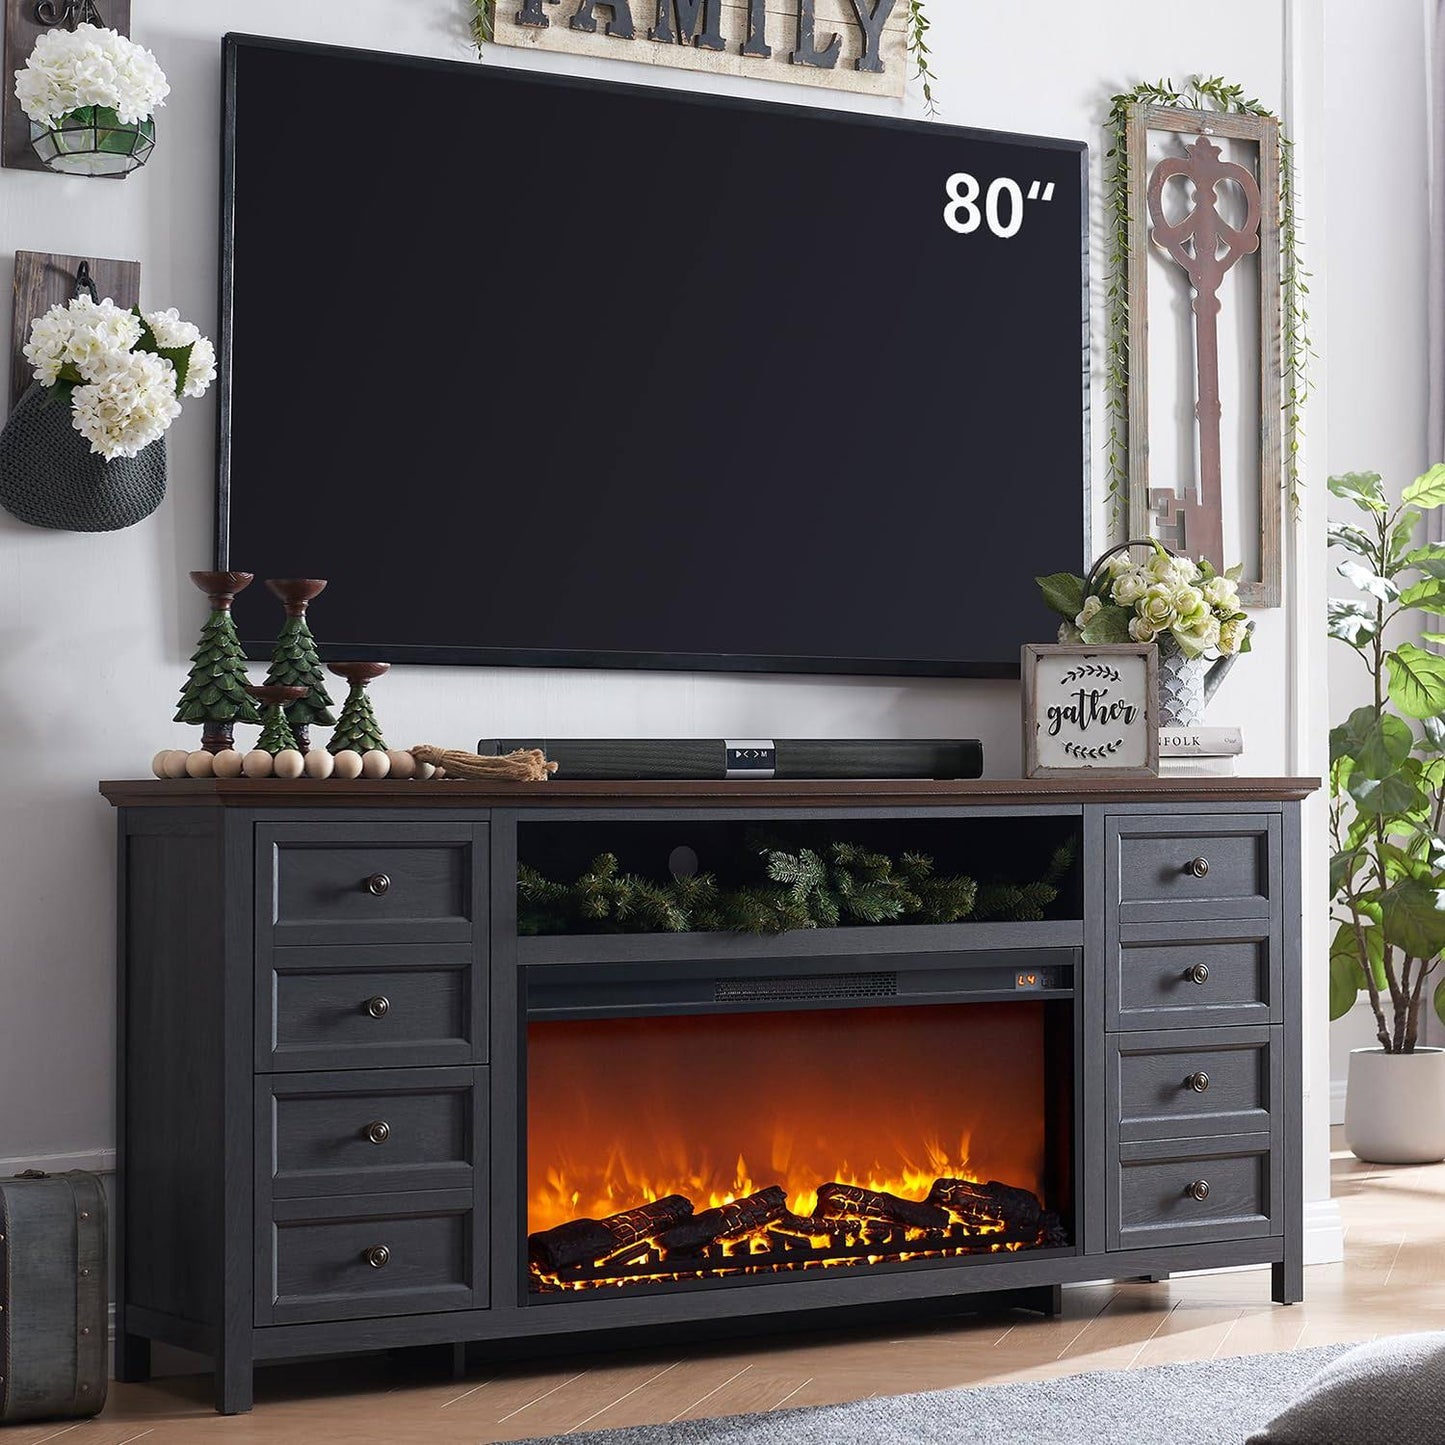 Fireplace Tv Stand For Tvs Up To 80 Inches, Farmhouse Entertainment Center W/36 Electric Fireplace & 4 Faux Double Drawers, Large Media